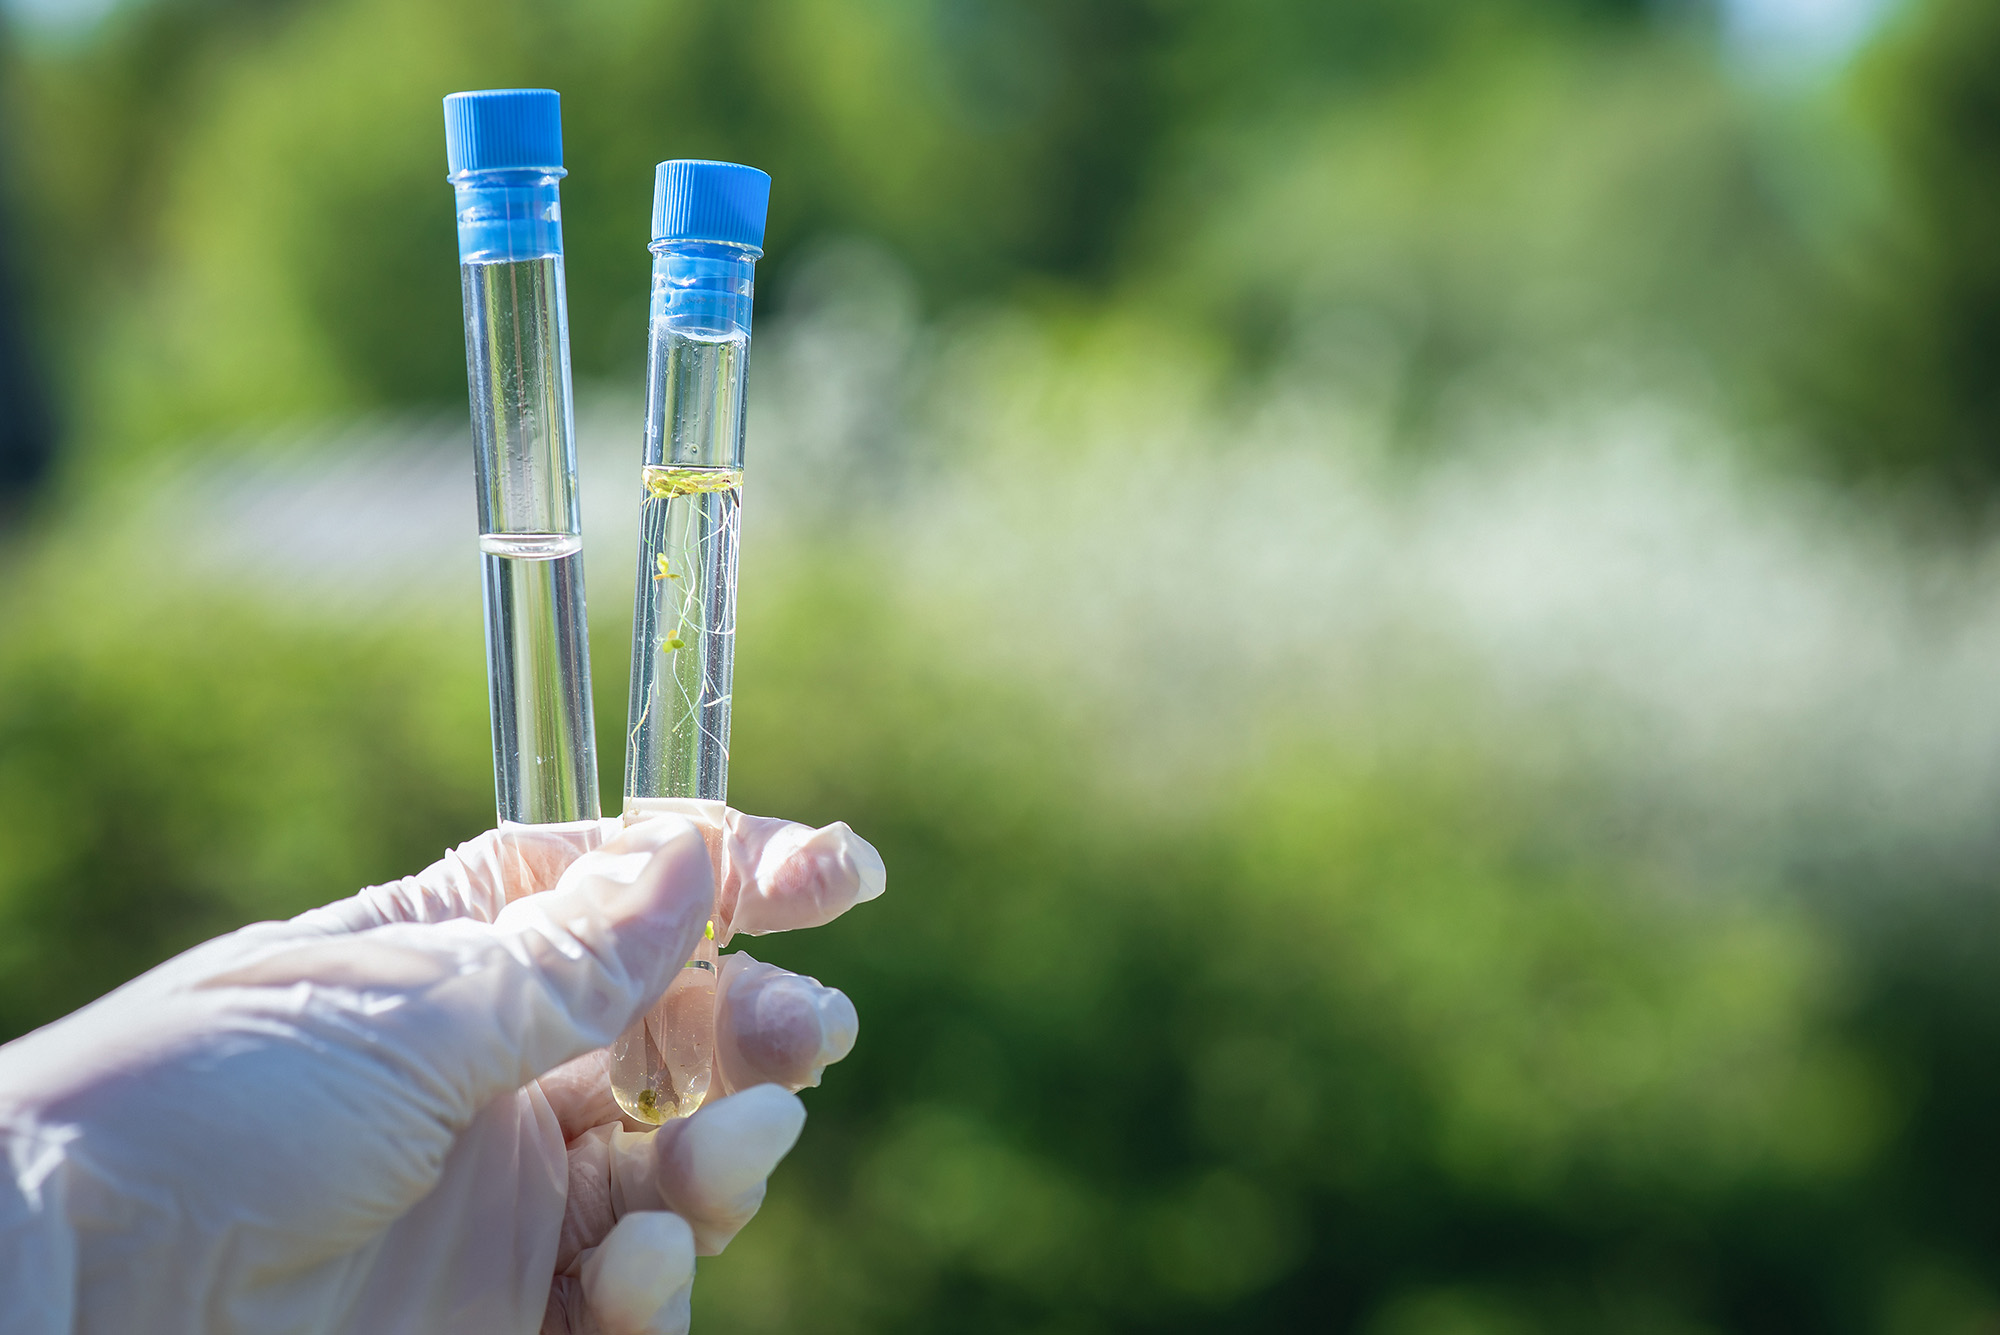 Stock photo of hand holding test tubes outside